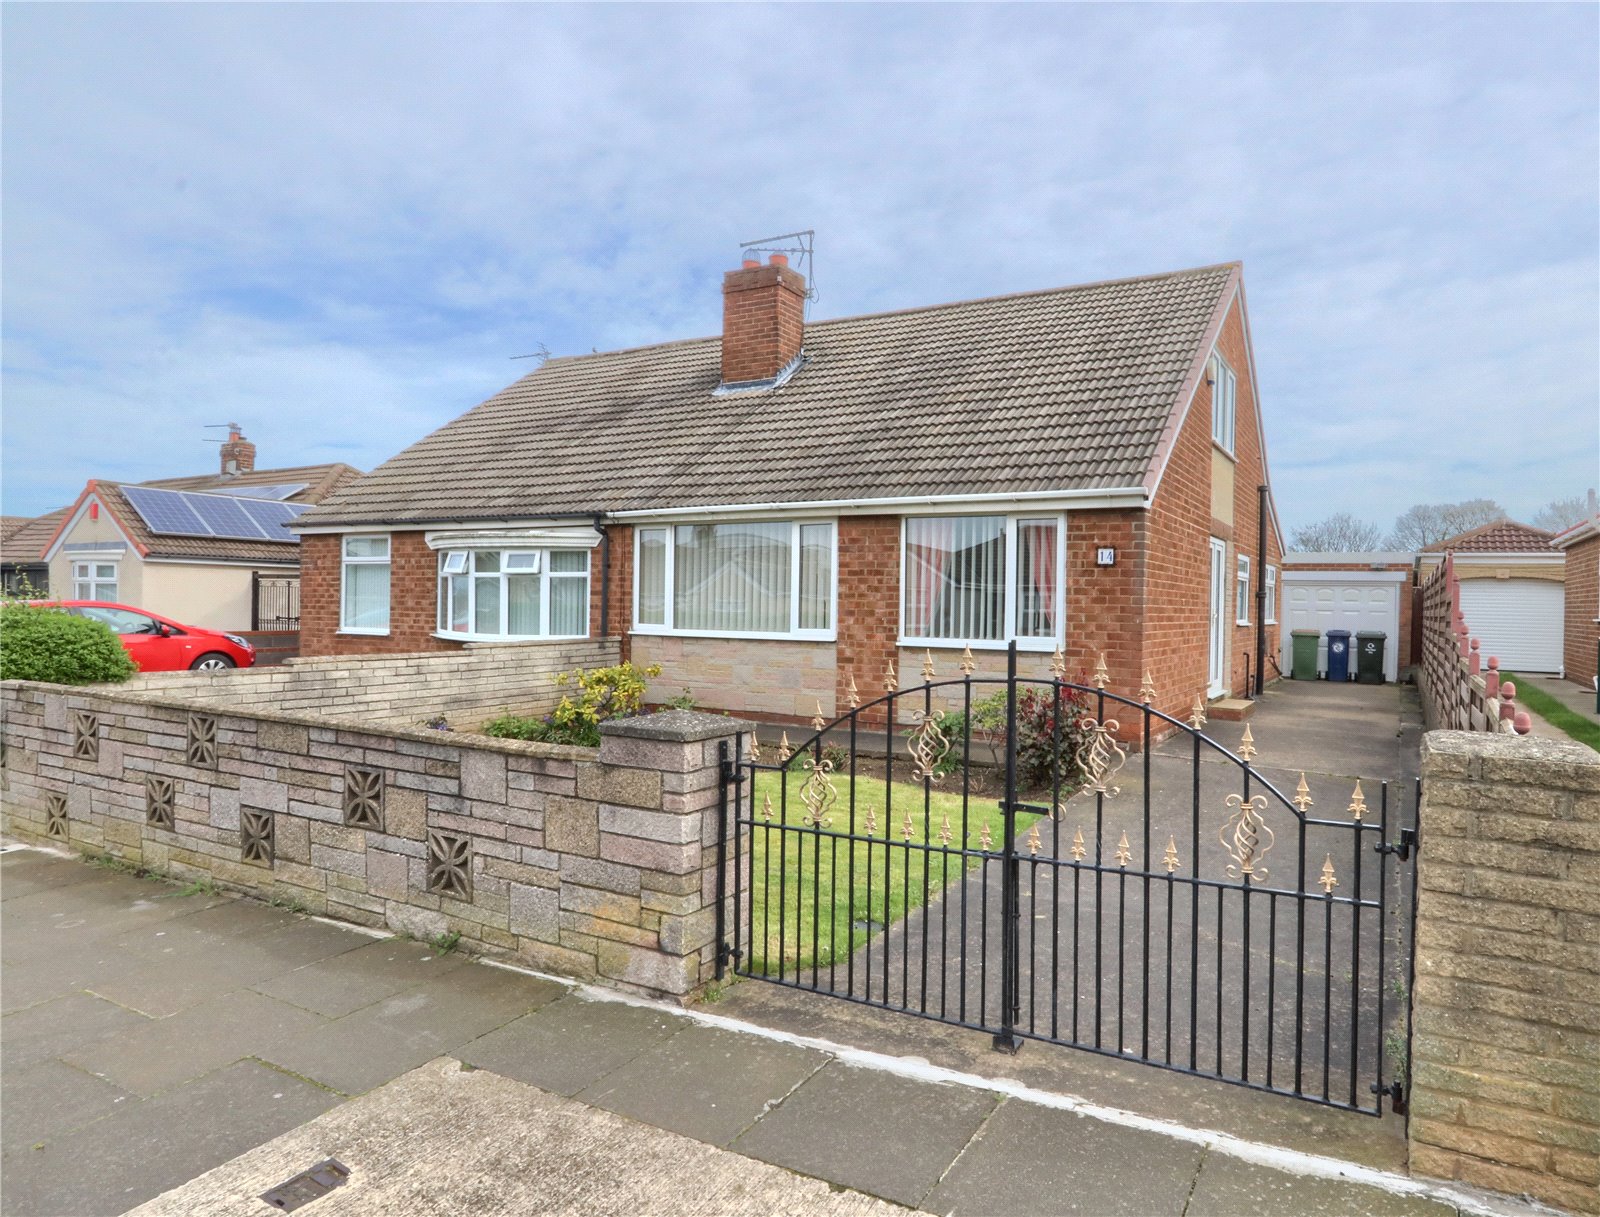 3 bed bungalow for sale in Winston Drive, Middlesbrough - Property Image 1